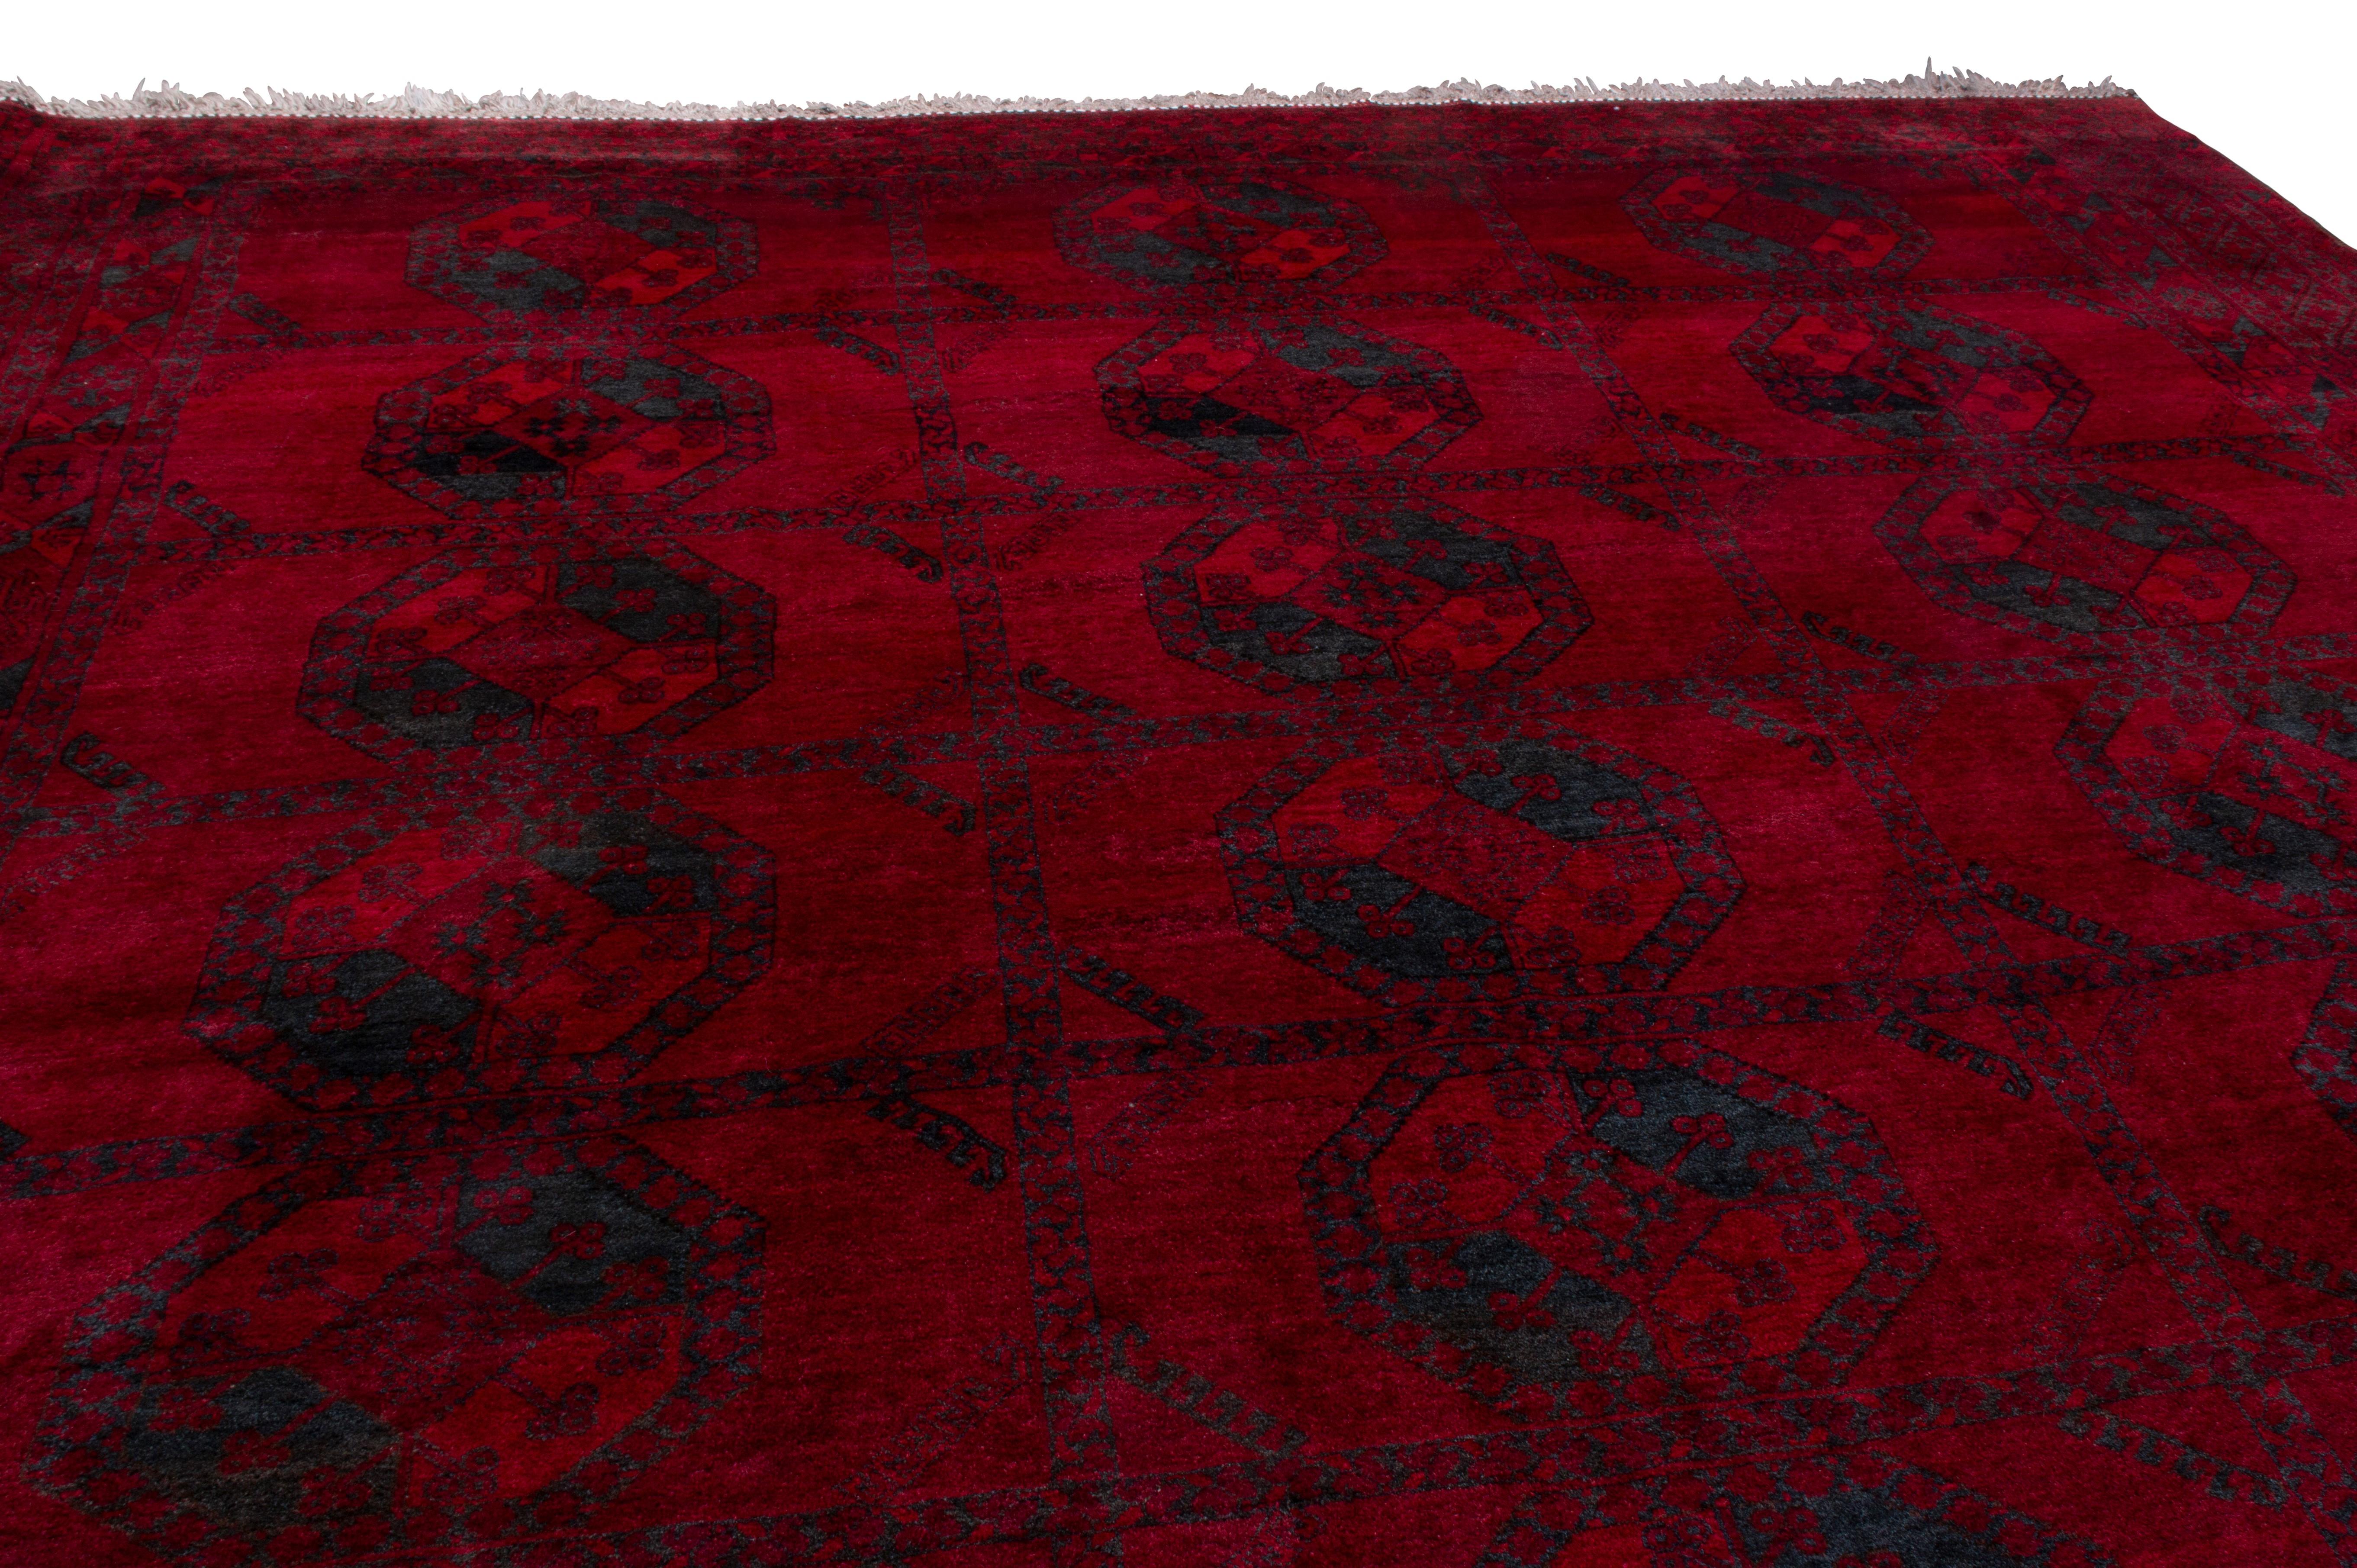 Originating from Afghanistan in 1950, hand knotted in durable, high quality wool, this more modern Afghan piece enjoys a more finely woven pattern than even its renowned antique ancestors, though it still employs bold color contrast with the